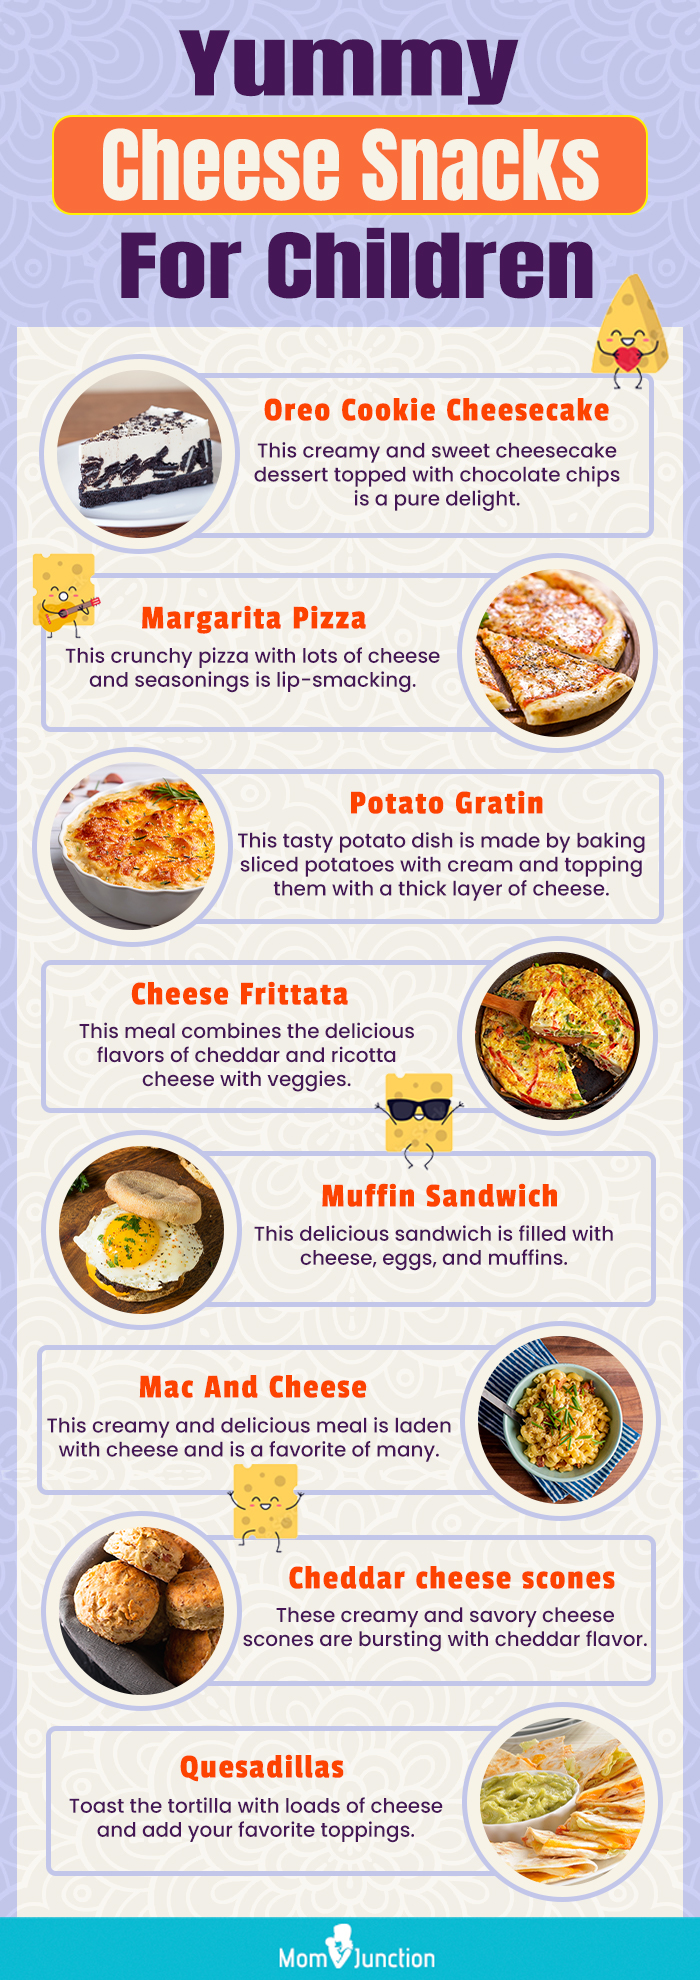 yummy cheese snacks for children (infographic)